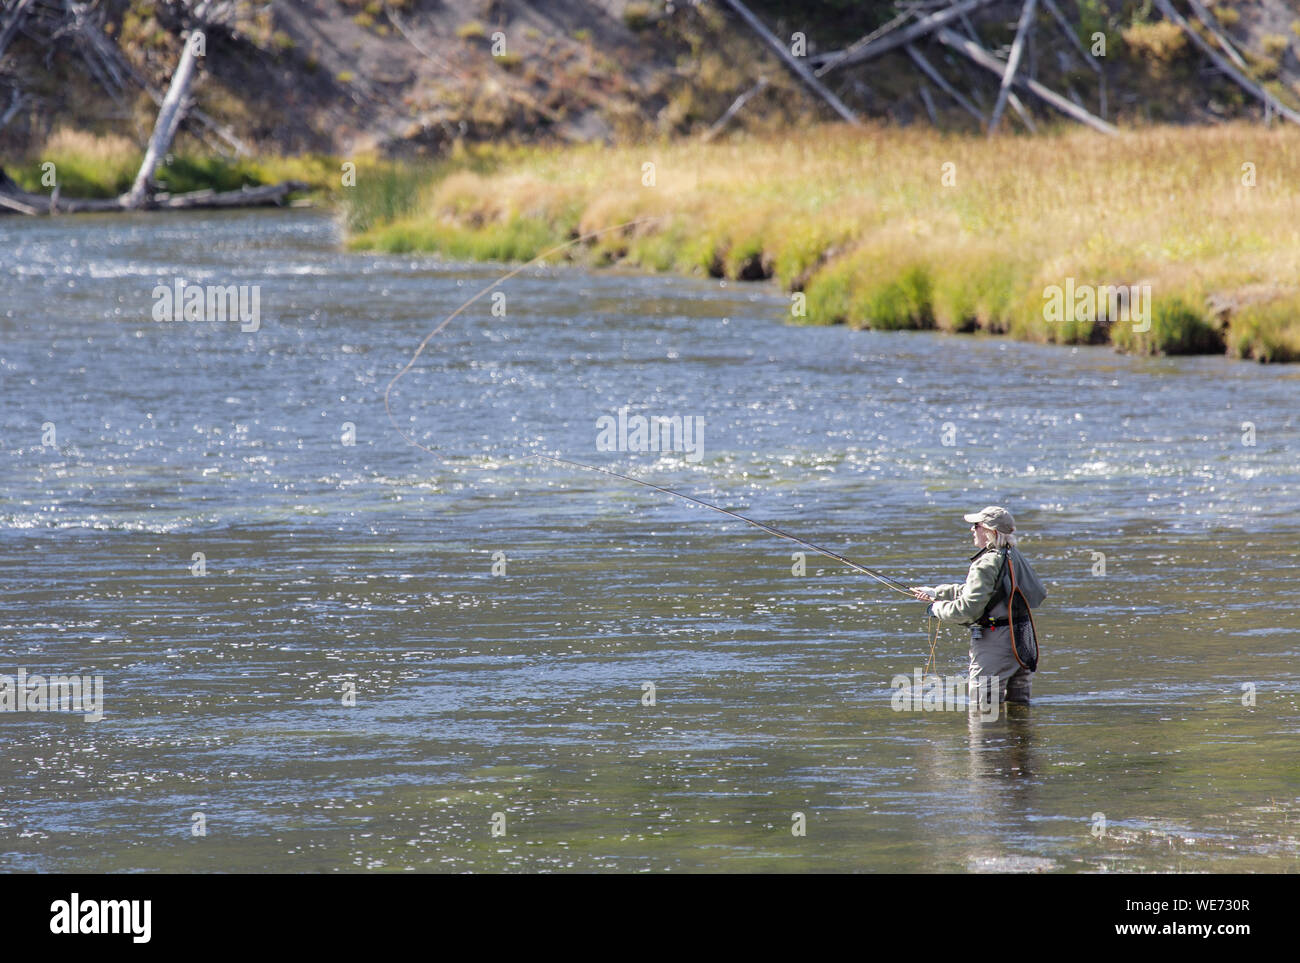 Fly Fishing, Yellowstone National Park. A woman fly fishing in the Firehole River in Yellowstone National Park, Wyoming. The Firehole River is a 21 mile long river located in northwestern Wyoming.  It joins the Gibbon River at Madison Junction in Yellowstone National Park as one of the two main tributaries of the Madison River.  Run-off from the geothermal formations inside Yellowstone Park can increase the temperature of the Firehole River as much as 18F, as well as deposit minerals such as aresenic in the stream itself.  In spite of this, trout thrive in the river and it is a well-known fly  Stock Photo